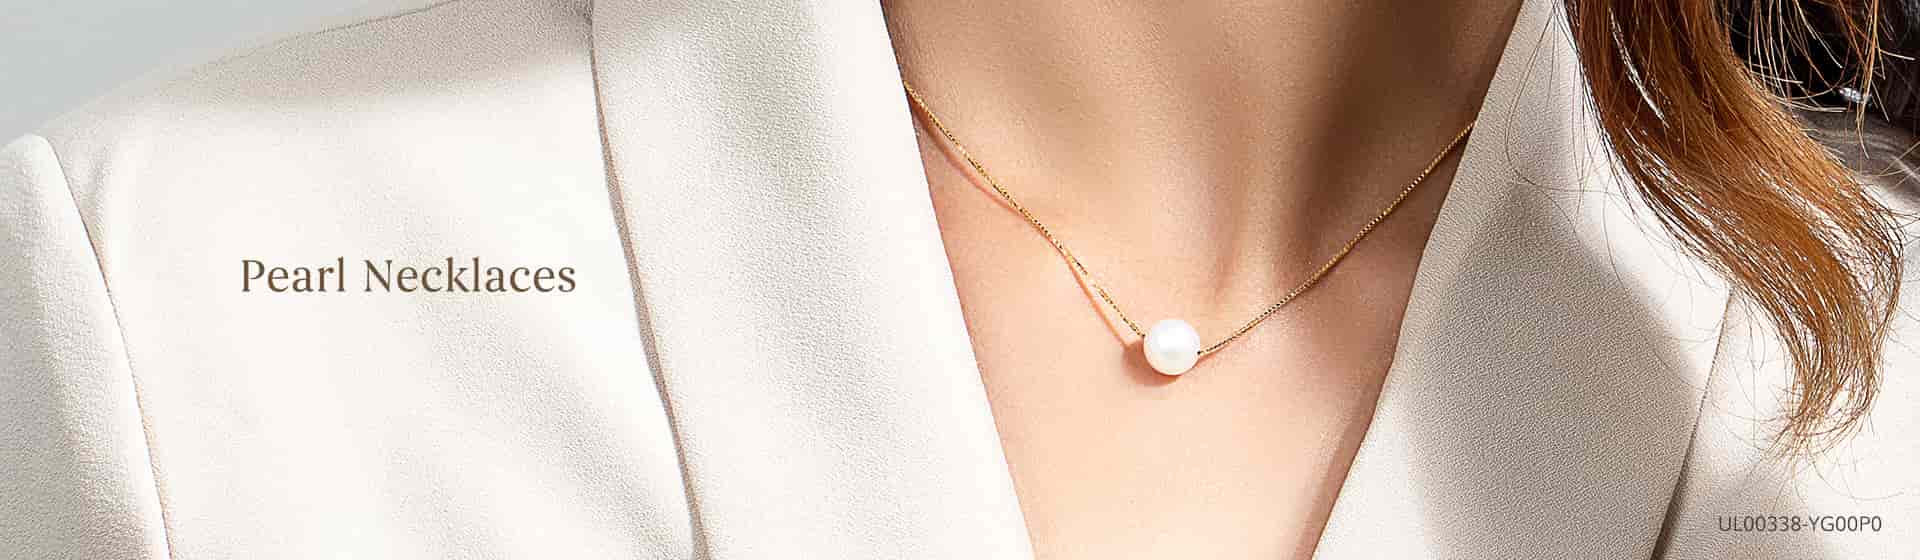 Flaunt Your Style With Fashionable Pearls Necklaces